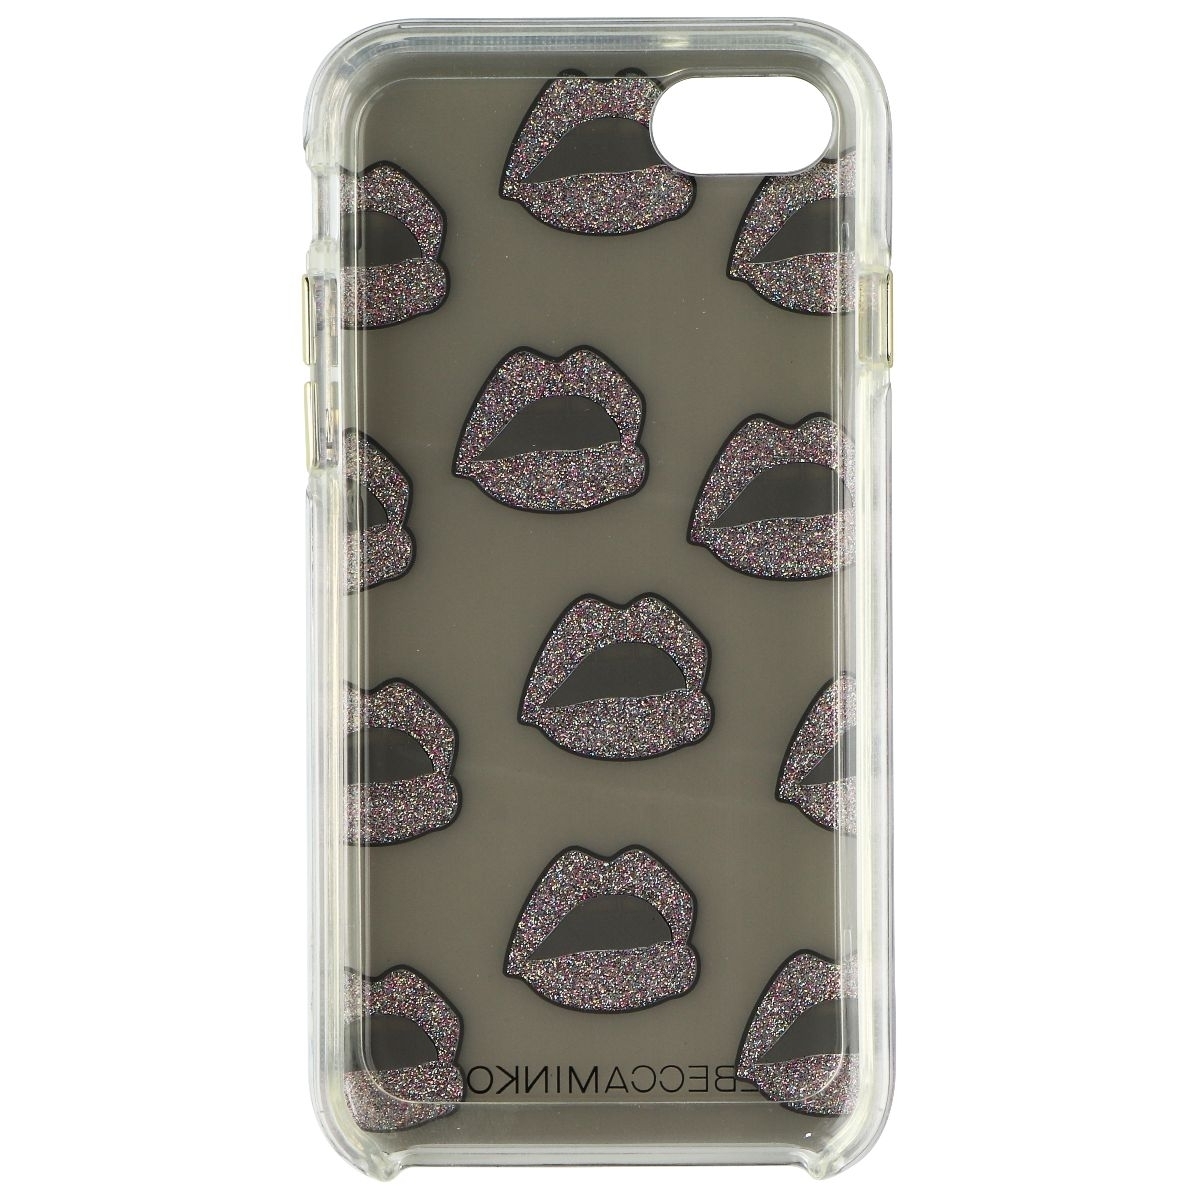 Rebecca Minkoff Double Up Series Case For Apple IPhone 7 - Clear/Glitter Lips (Refurbished)